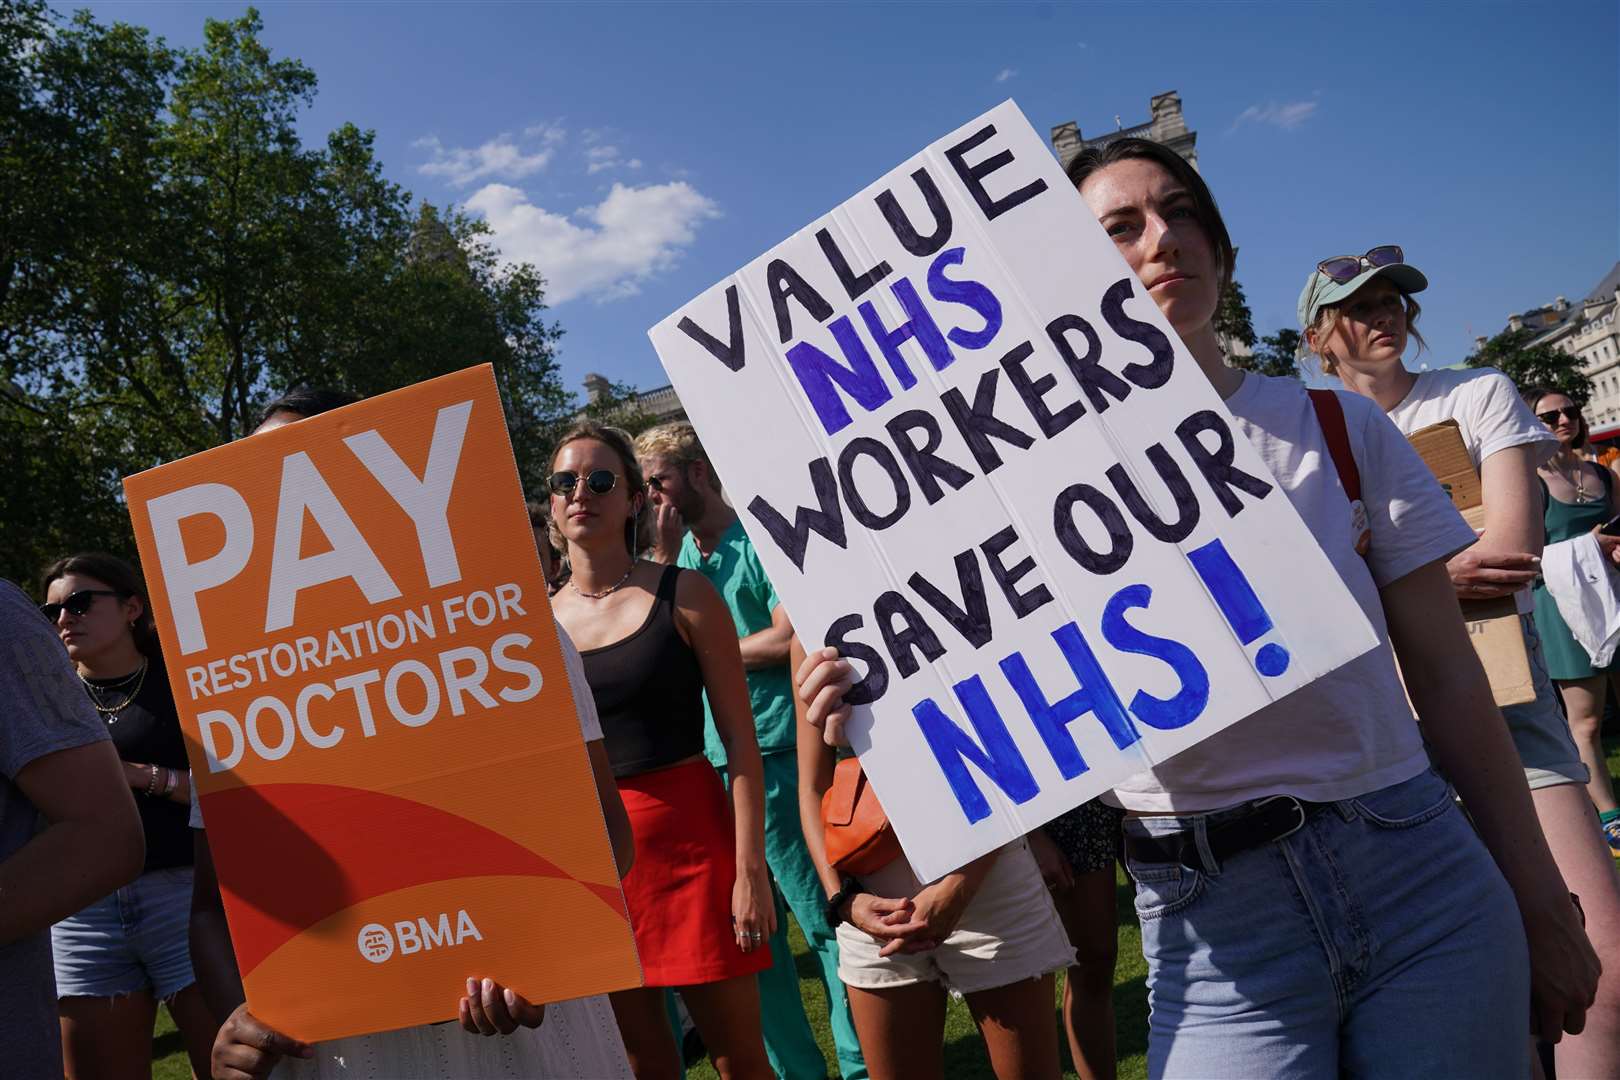 Consultants said there are no plans for co-ordinated action with junior doctors (Lucy North/PA)